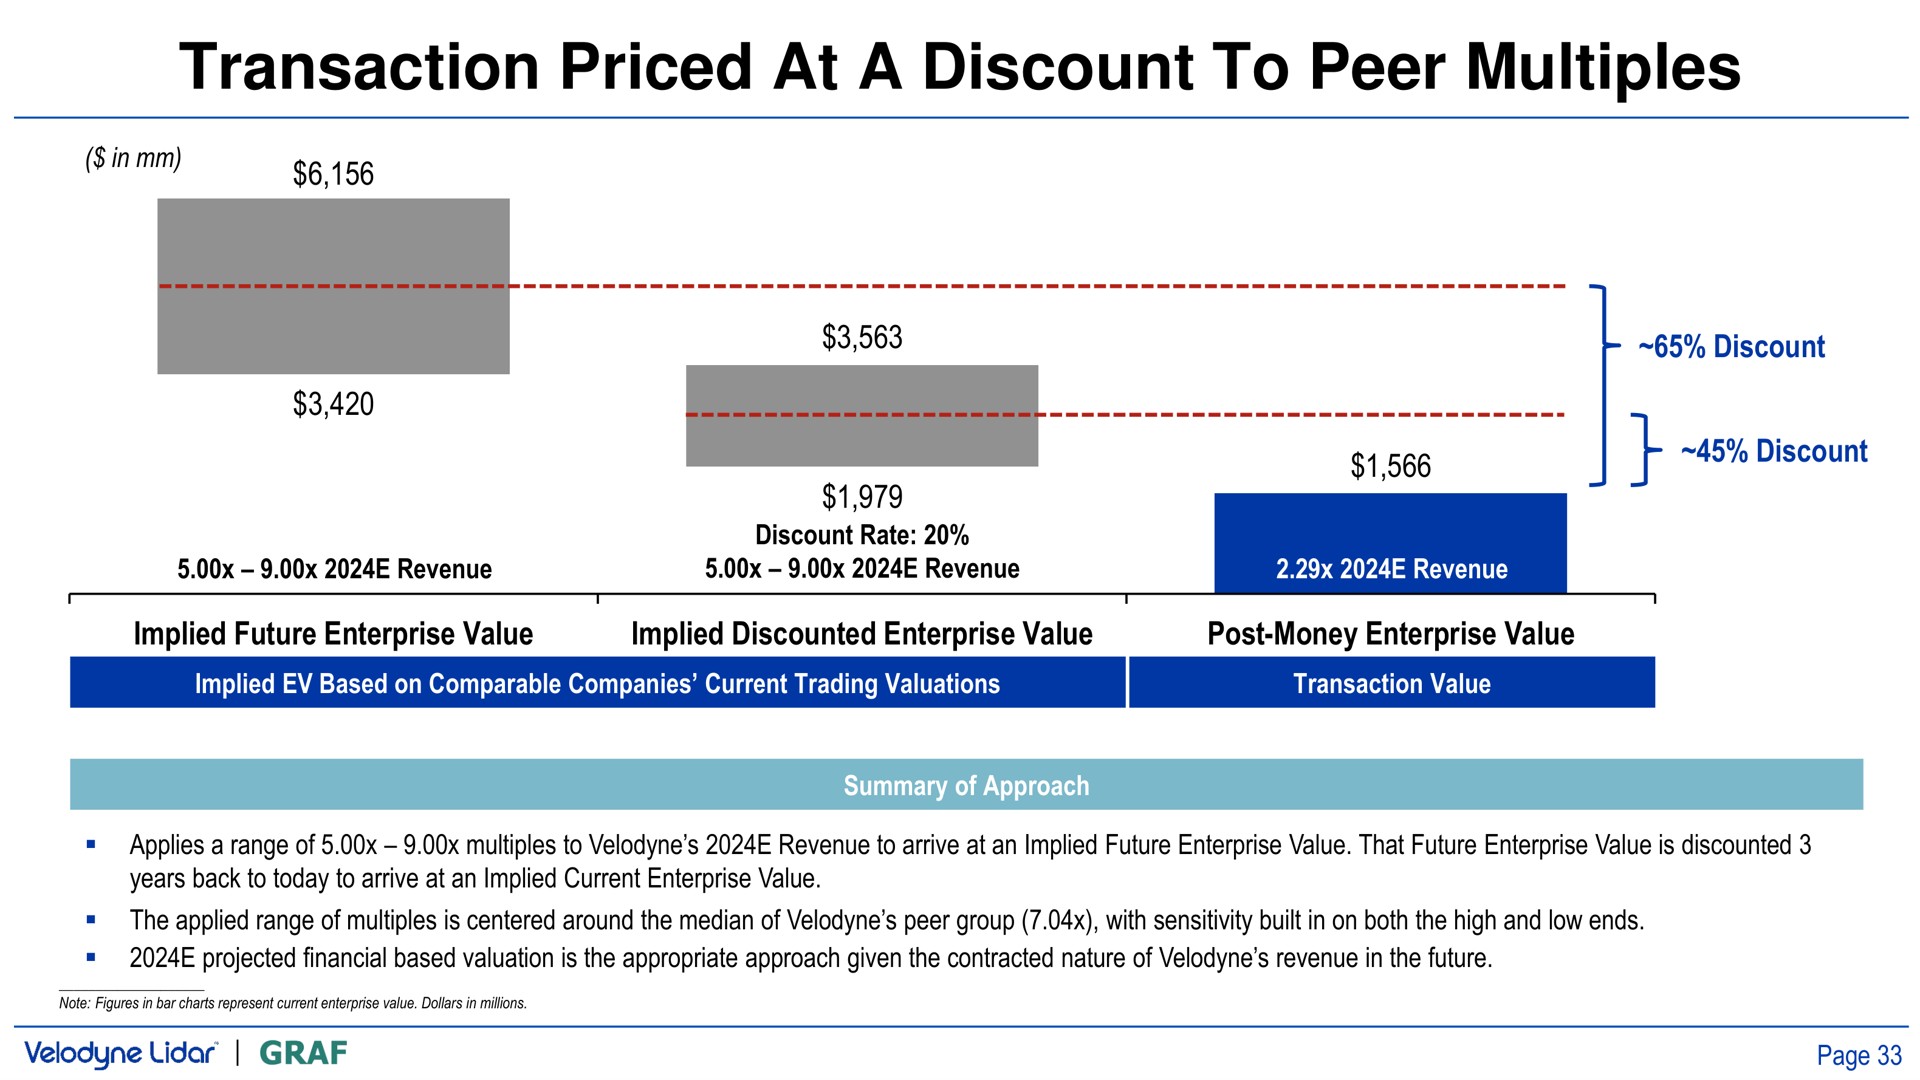 transaction priced at a discount to peer multiples | Velodyne Lidar